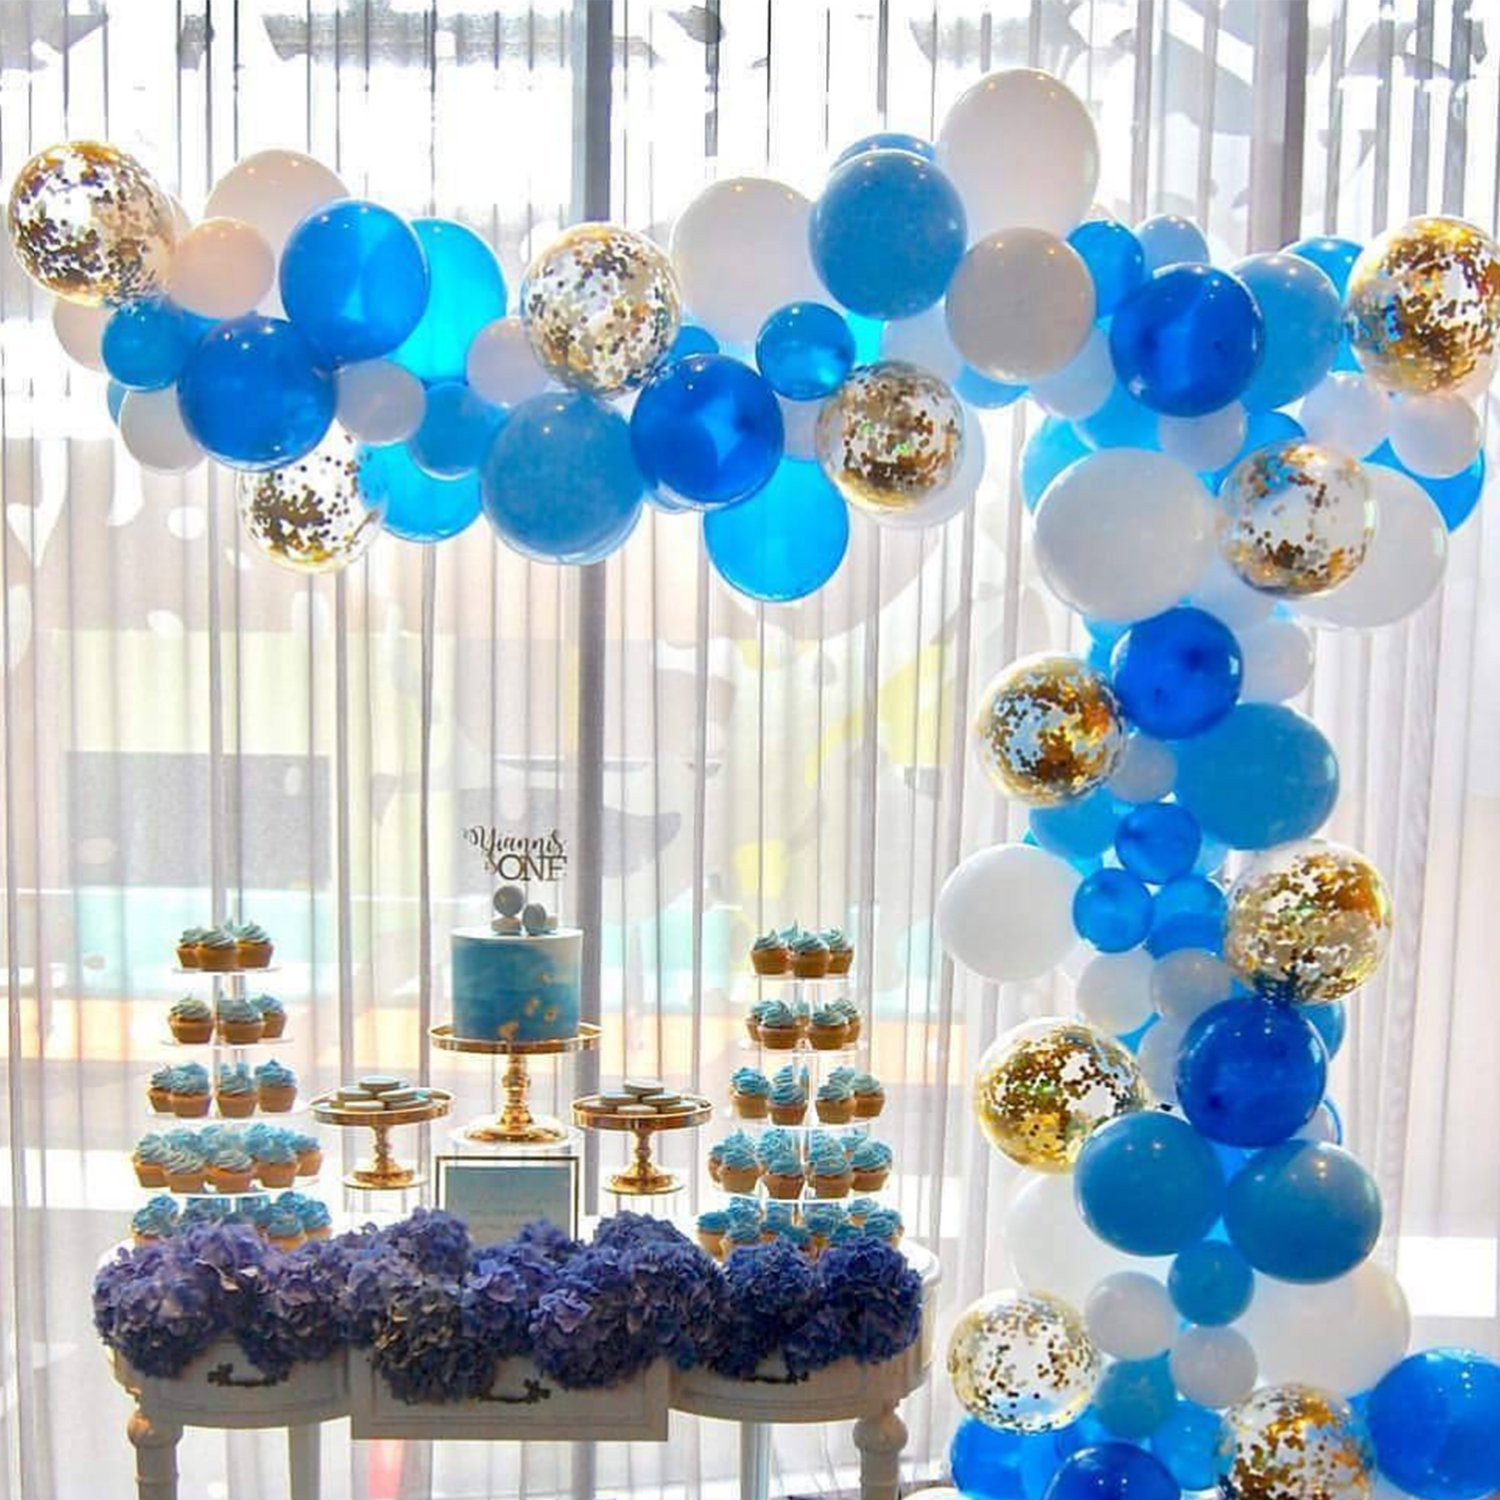 Blue And Gold Graduation Party Ideas
 PartyWoo Blue Gold and White Balloons 70 pcs 12 inch Royal